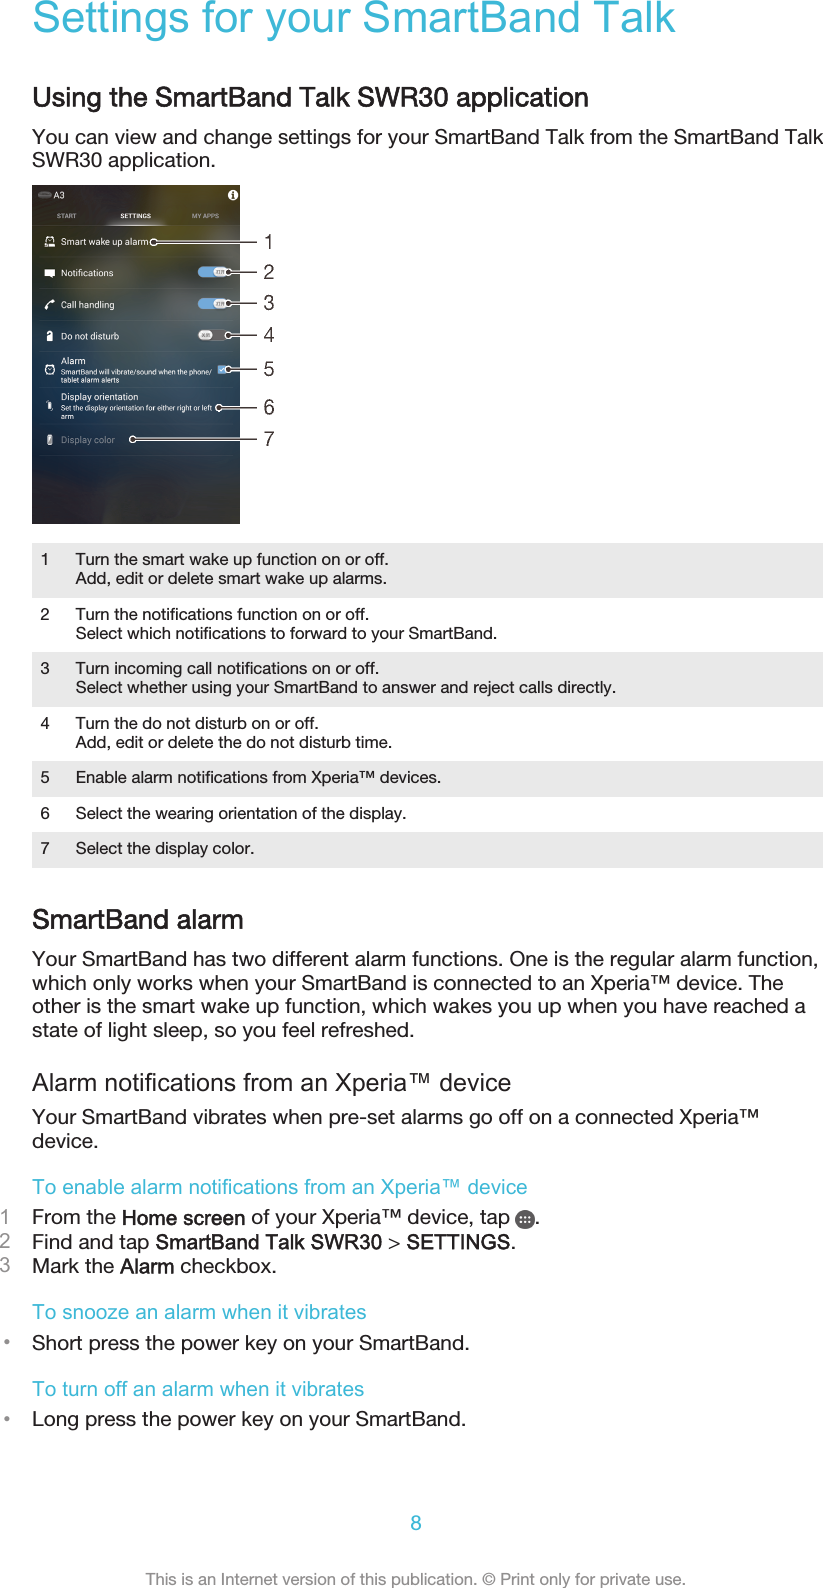 Settings for your SmartBand TalkUsing the SmartBand Talk SWR30 applicationYou can view and change settings for your SmartBand Talk from the SmartBand TalkSWR30 application.1 Turn the smart wake up function on or off.Add, edit or delete smart wake up alarms.2 Turn the notifications function on or off.Select which notifications to forward to your SmartBand.3 Turn incoming call notifications on or off.Select whether using your SmartBand to answer and reject calls directly.4 Turn the do not disturb on or off.Add, edit or delete the do not disturb time.5 Enable alarm notifications from Xperia™ devices.6 Select the wearing orientation of the display.7 Select the display color.SmartBand alarmYour SmartBand has two different alarm functions. One is the regular alarm function,which only works when your SmartBand is connected to an Xperia™ device. Theother is the smart wake up function, which wakes you up when you have reached astate of light sleep, so you feel refreshed.Alarm notifications from an Xperia™ deviceYour SmartBand vibrates when pre-set alarms go off on a connected Xperia™device.To enable alarm notifications from an Xperia™ device1From the Home screen of your Xperia™ device, tap  .2Find and tap SmartBand Talk SWR30 &gt; SETTINGS.3Mark the Alarm checkbox.To snooze an alarm when it vibrates•Short press the power key on your SmartBand.To turn off an alarm when it vibrates•Long press the power key on your SmartBand.8This is an Internet version of this publication. © Print only for private use.